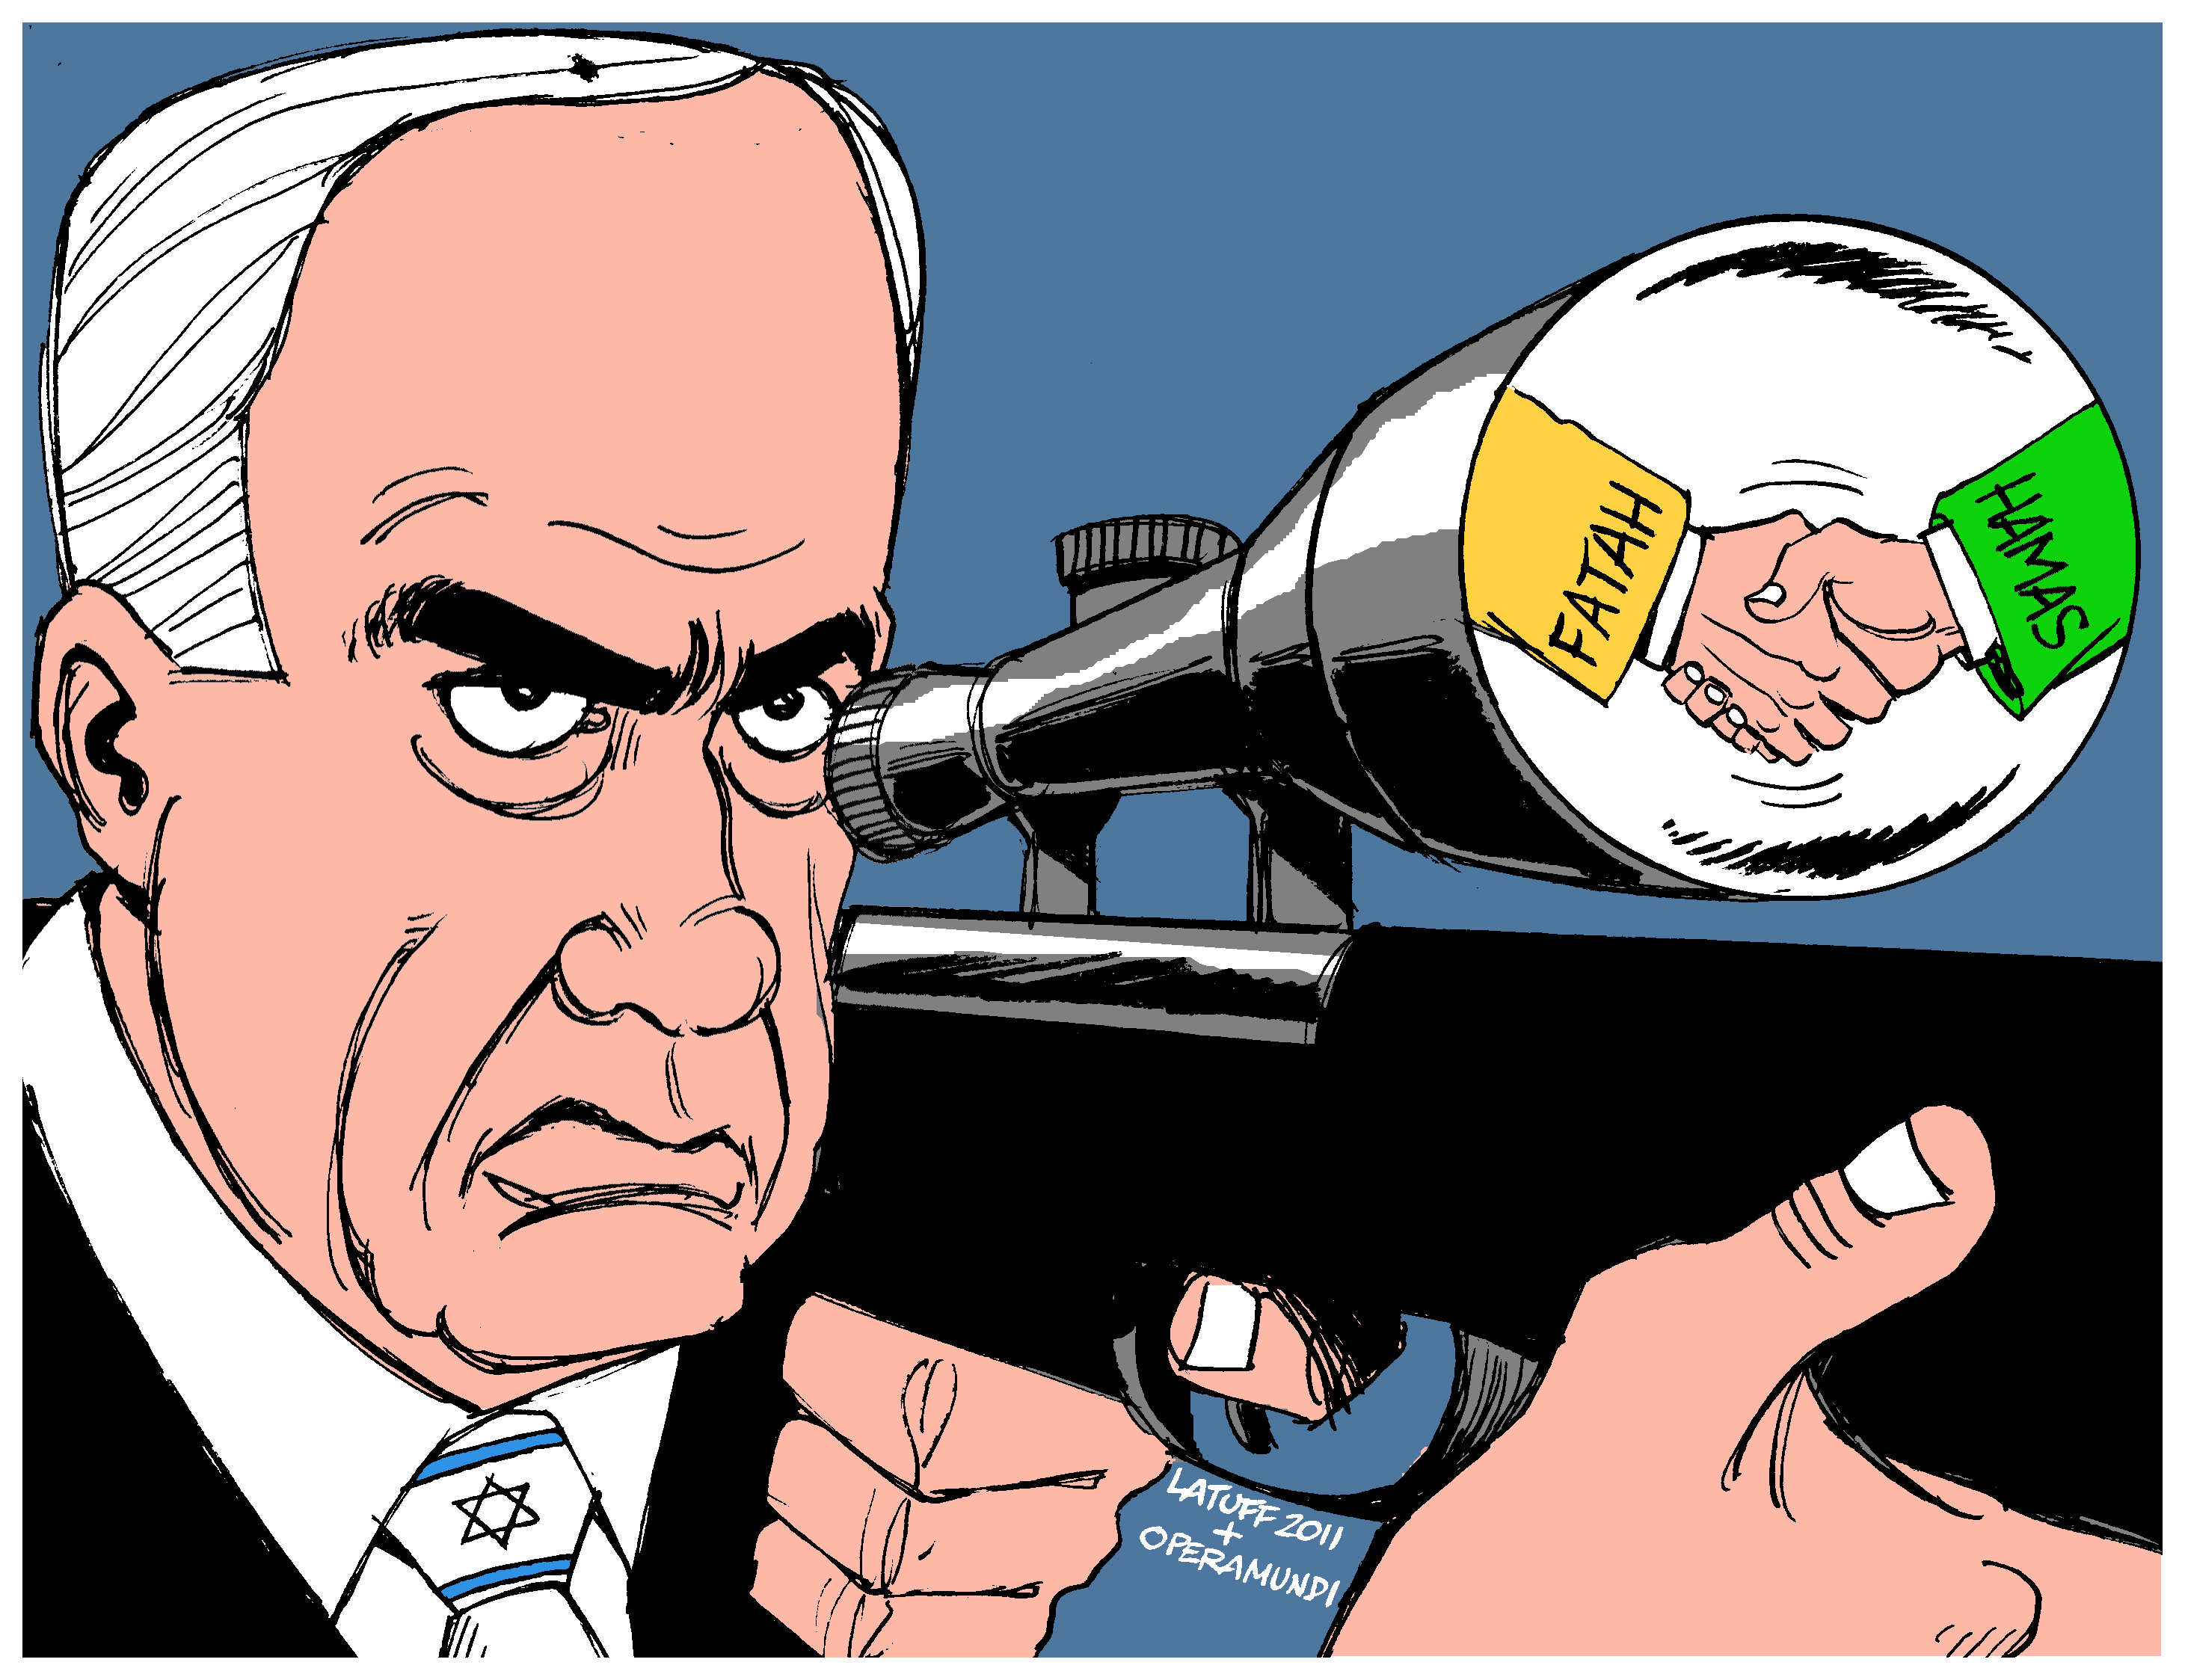 Israel: Aiming to Sabotage Palestinian Reconciliation